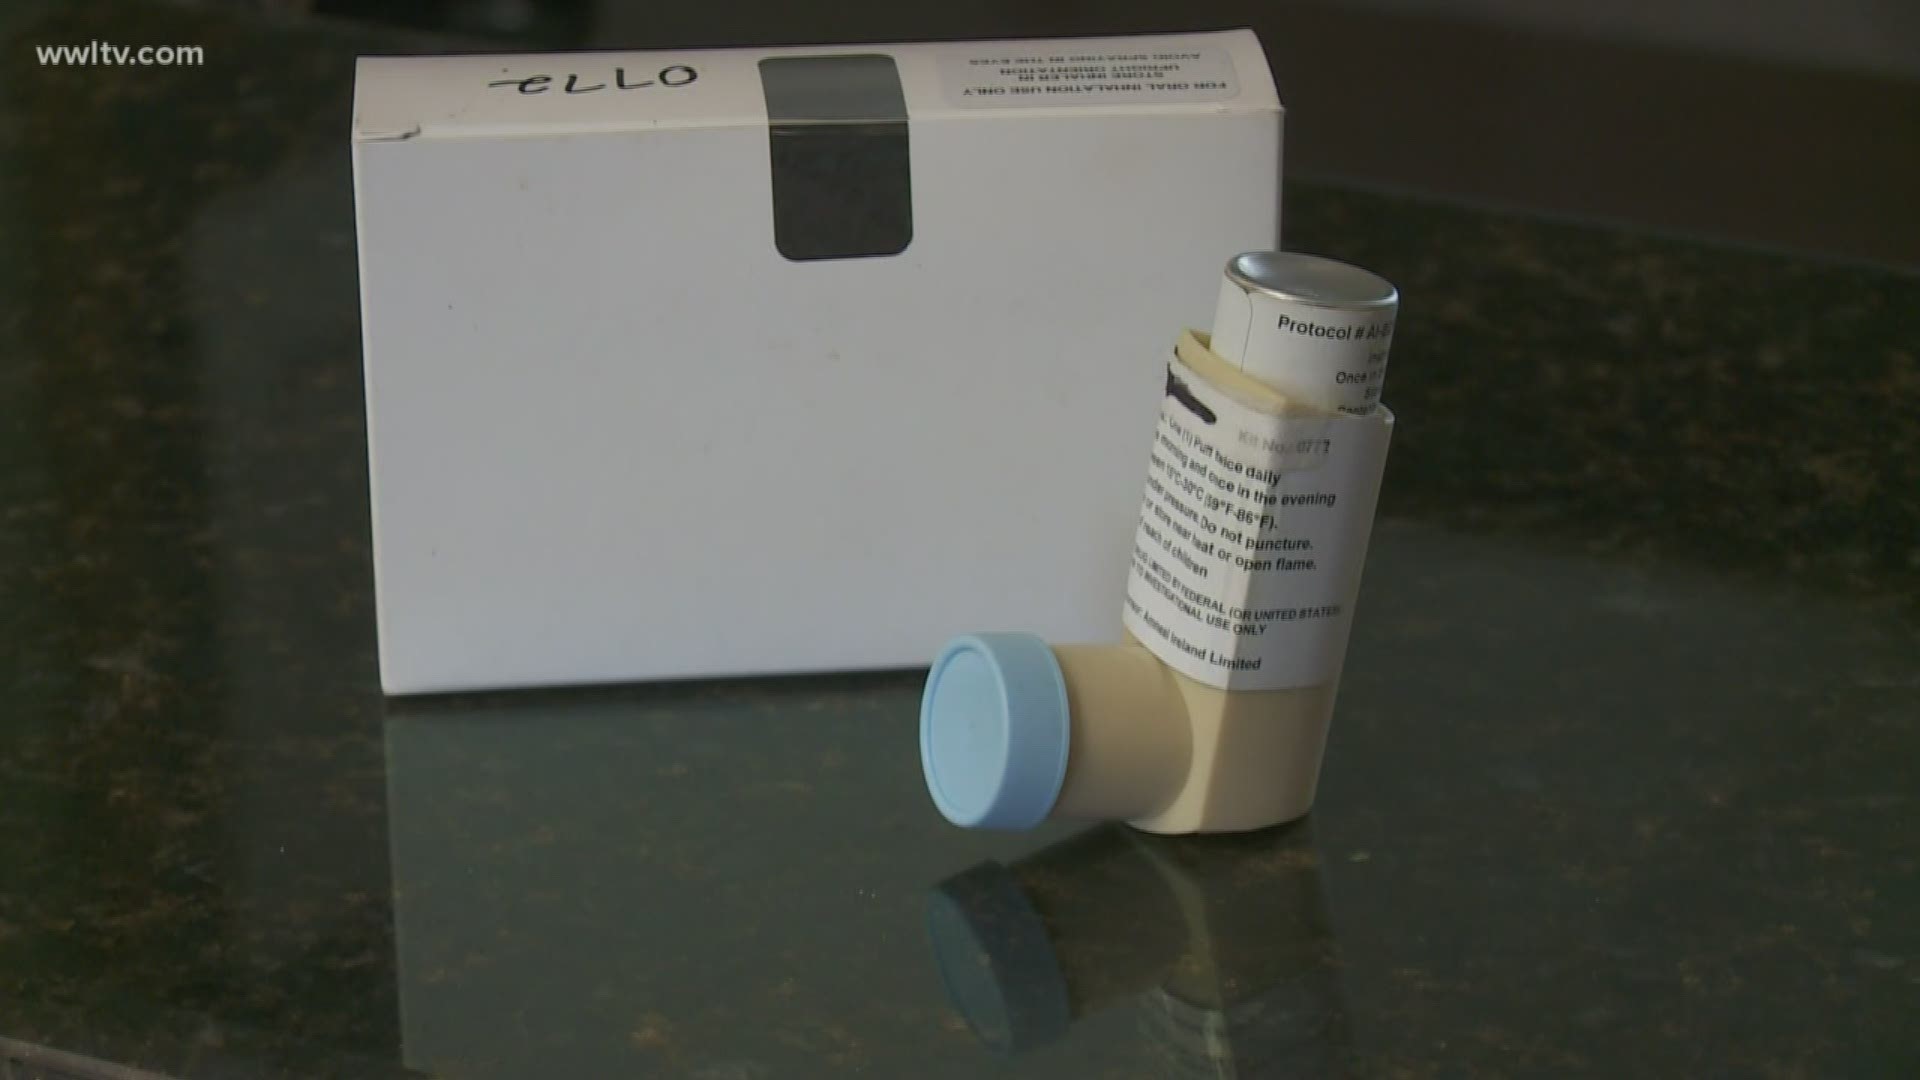 A new study is looking for volunteers in the New Orleans area to test out a new asthma medication.